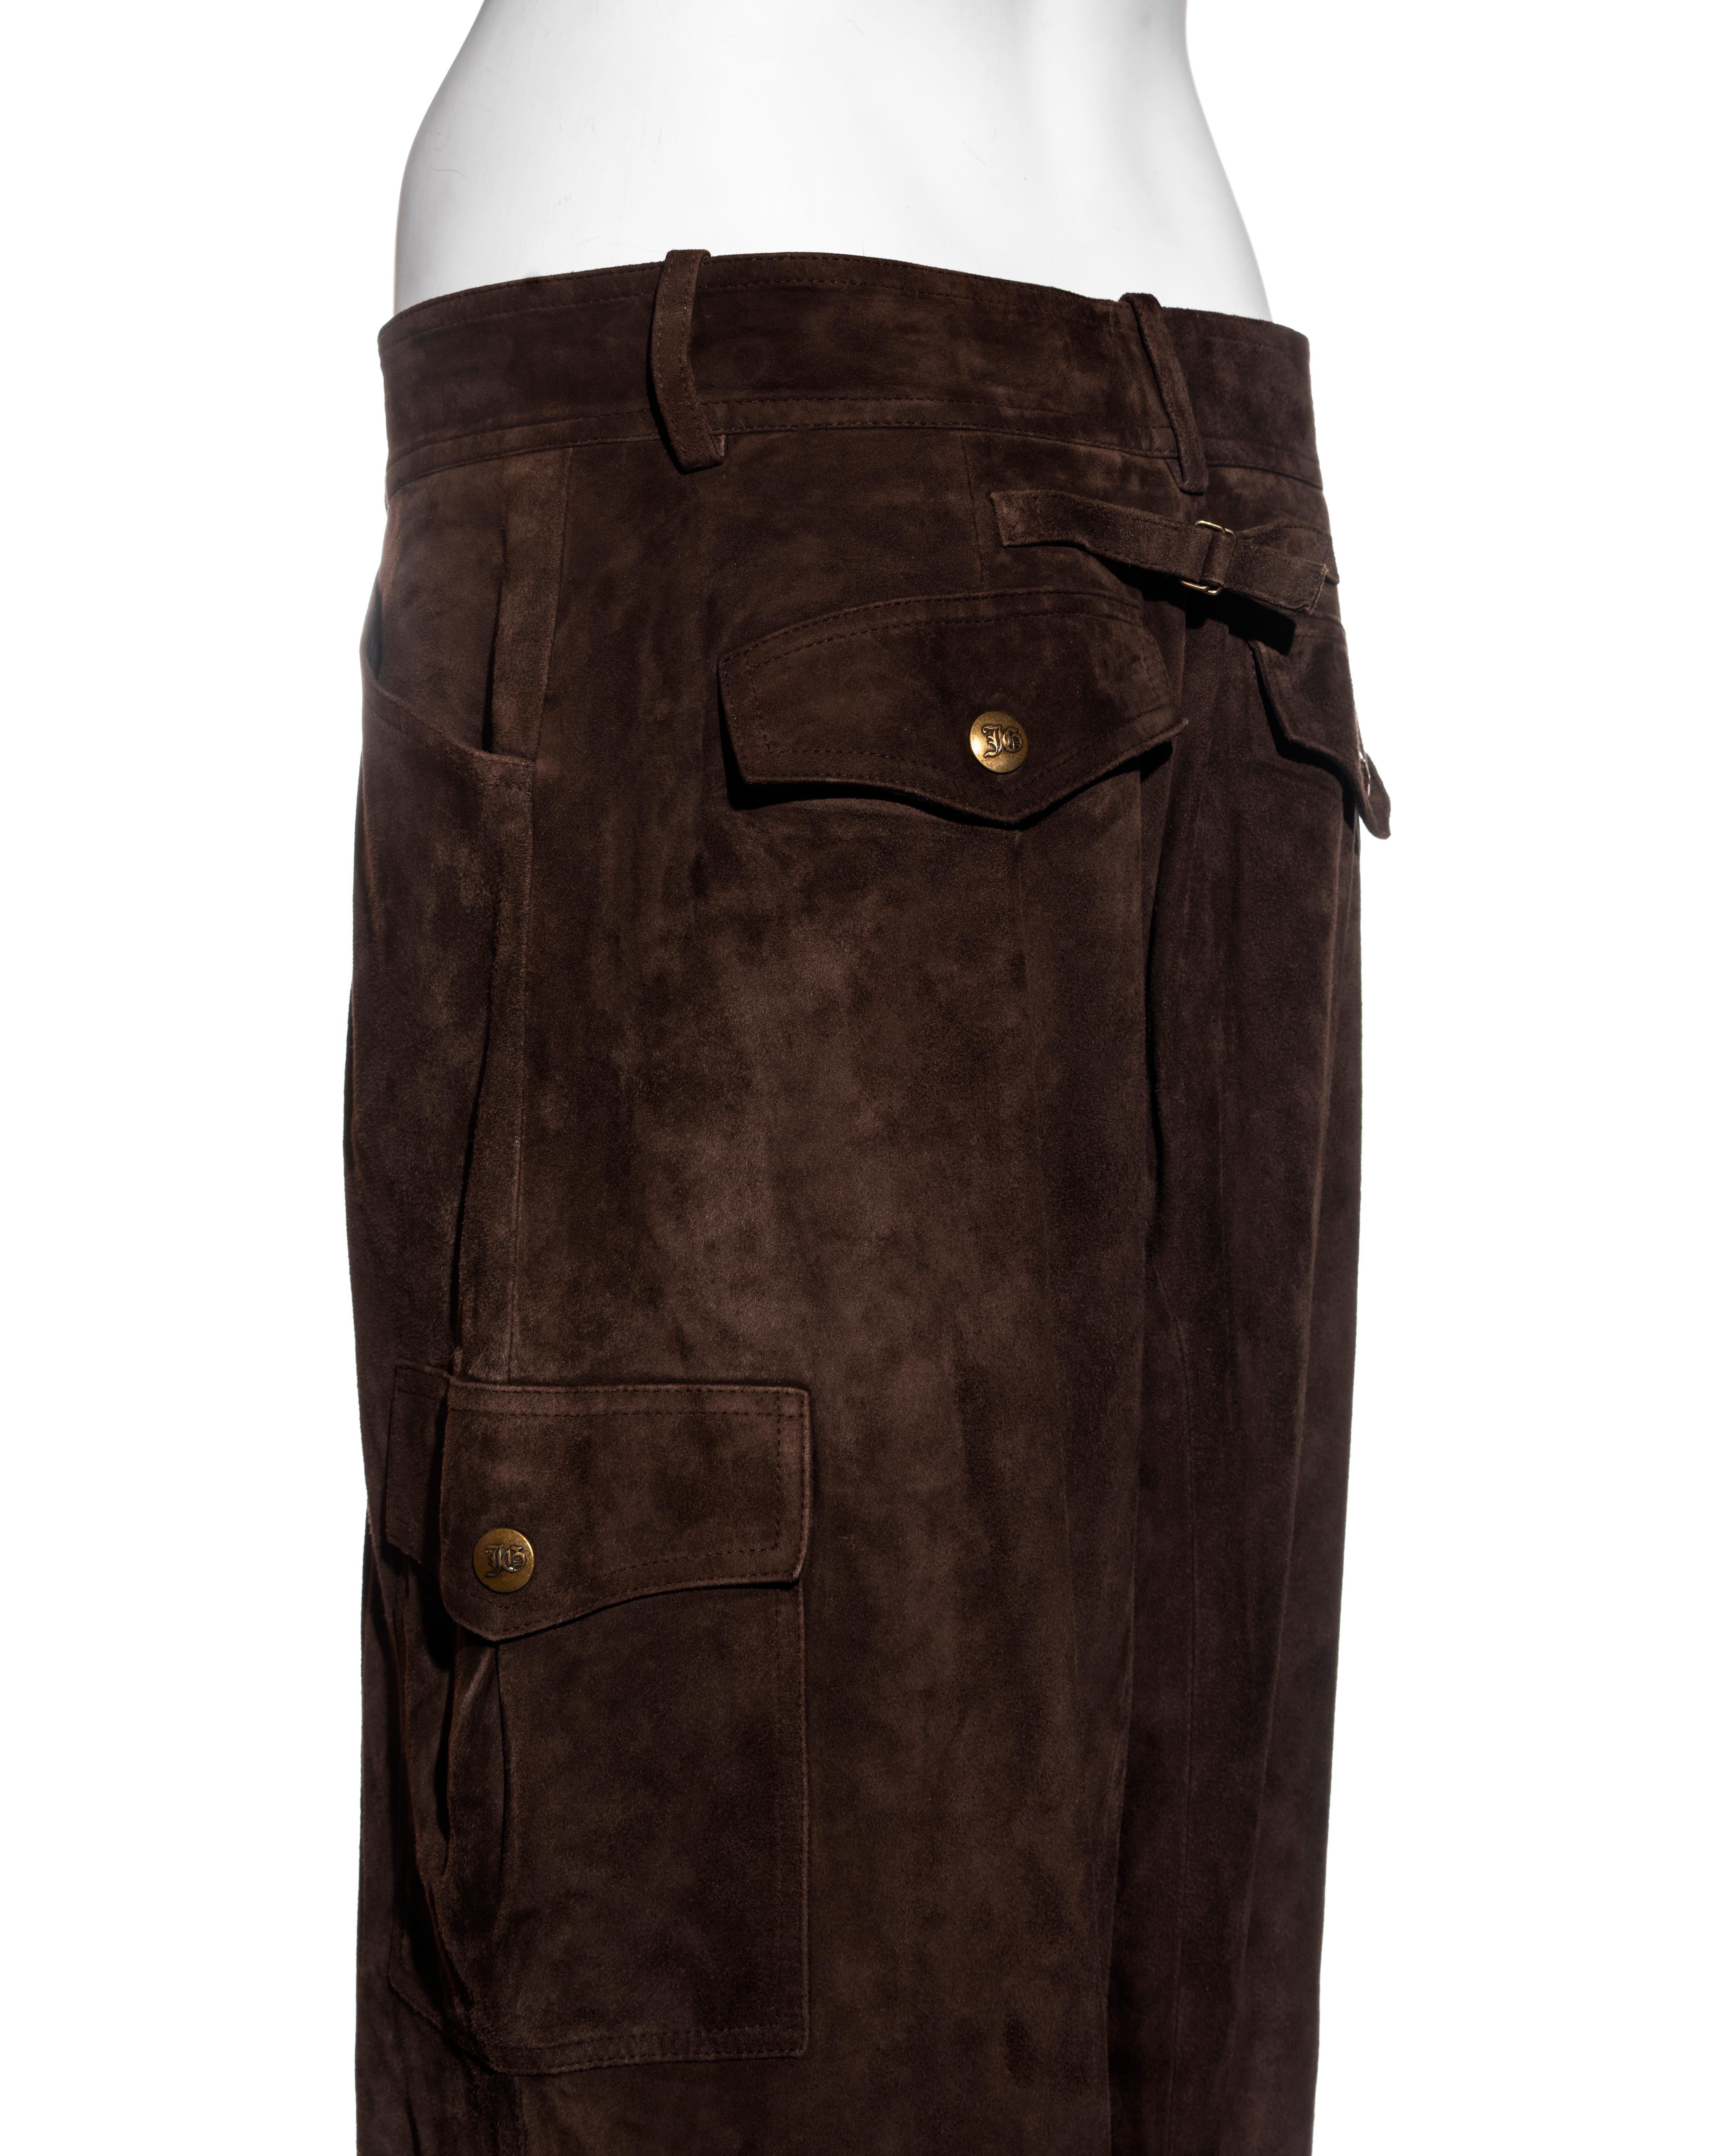 John Galliano brown embroidered suede cargo pants with fur trim, fw 2003 2